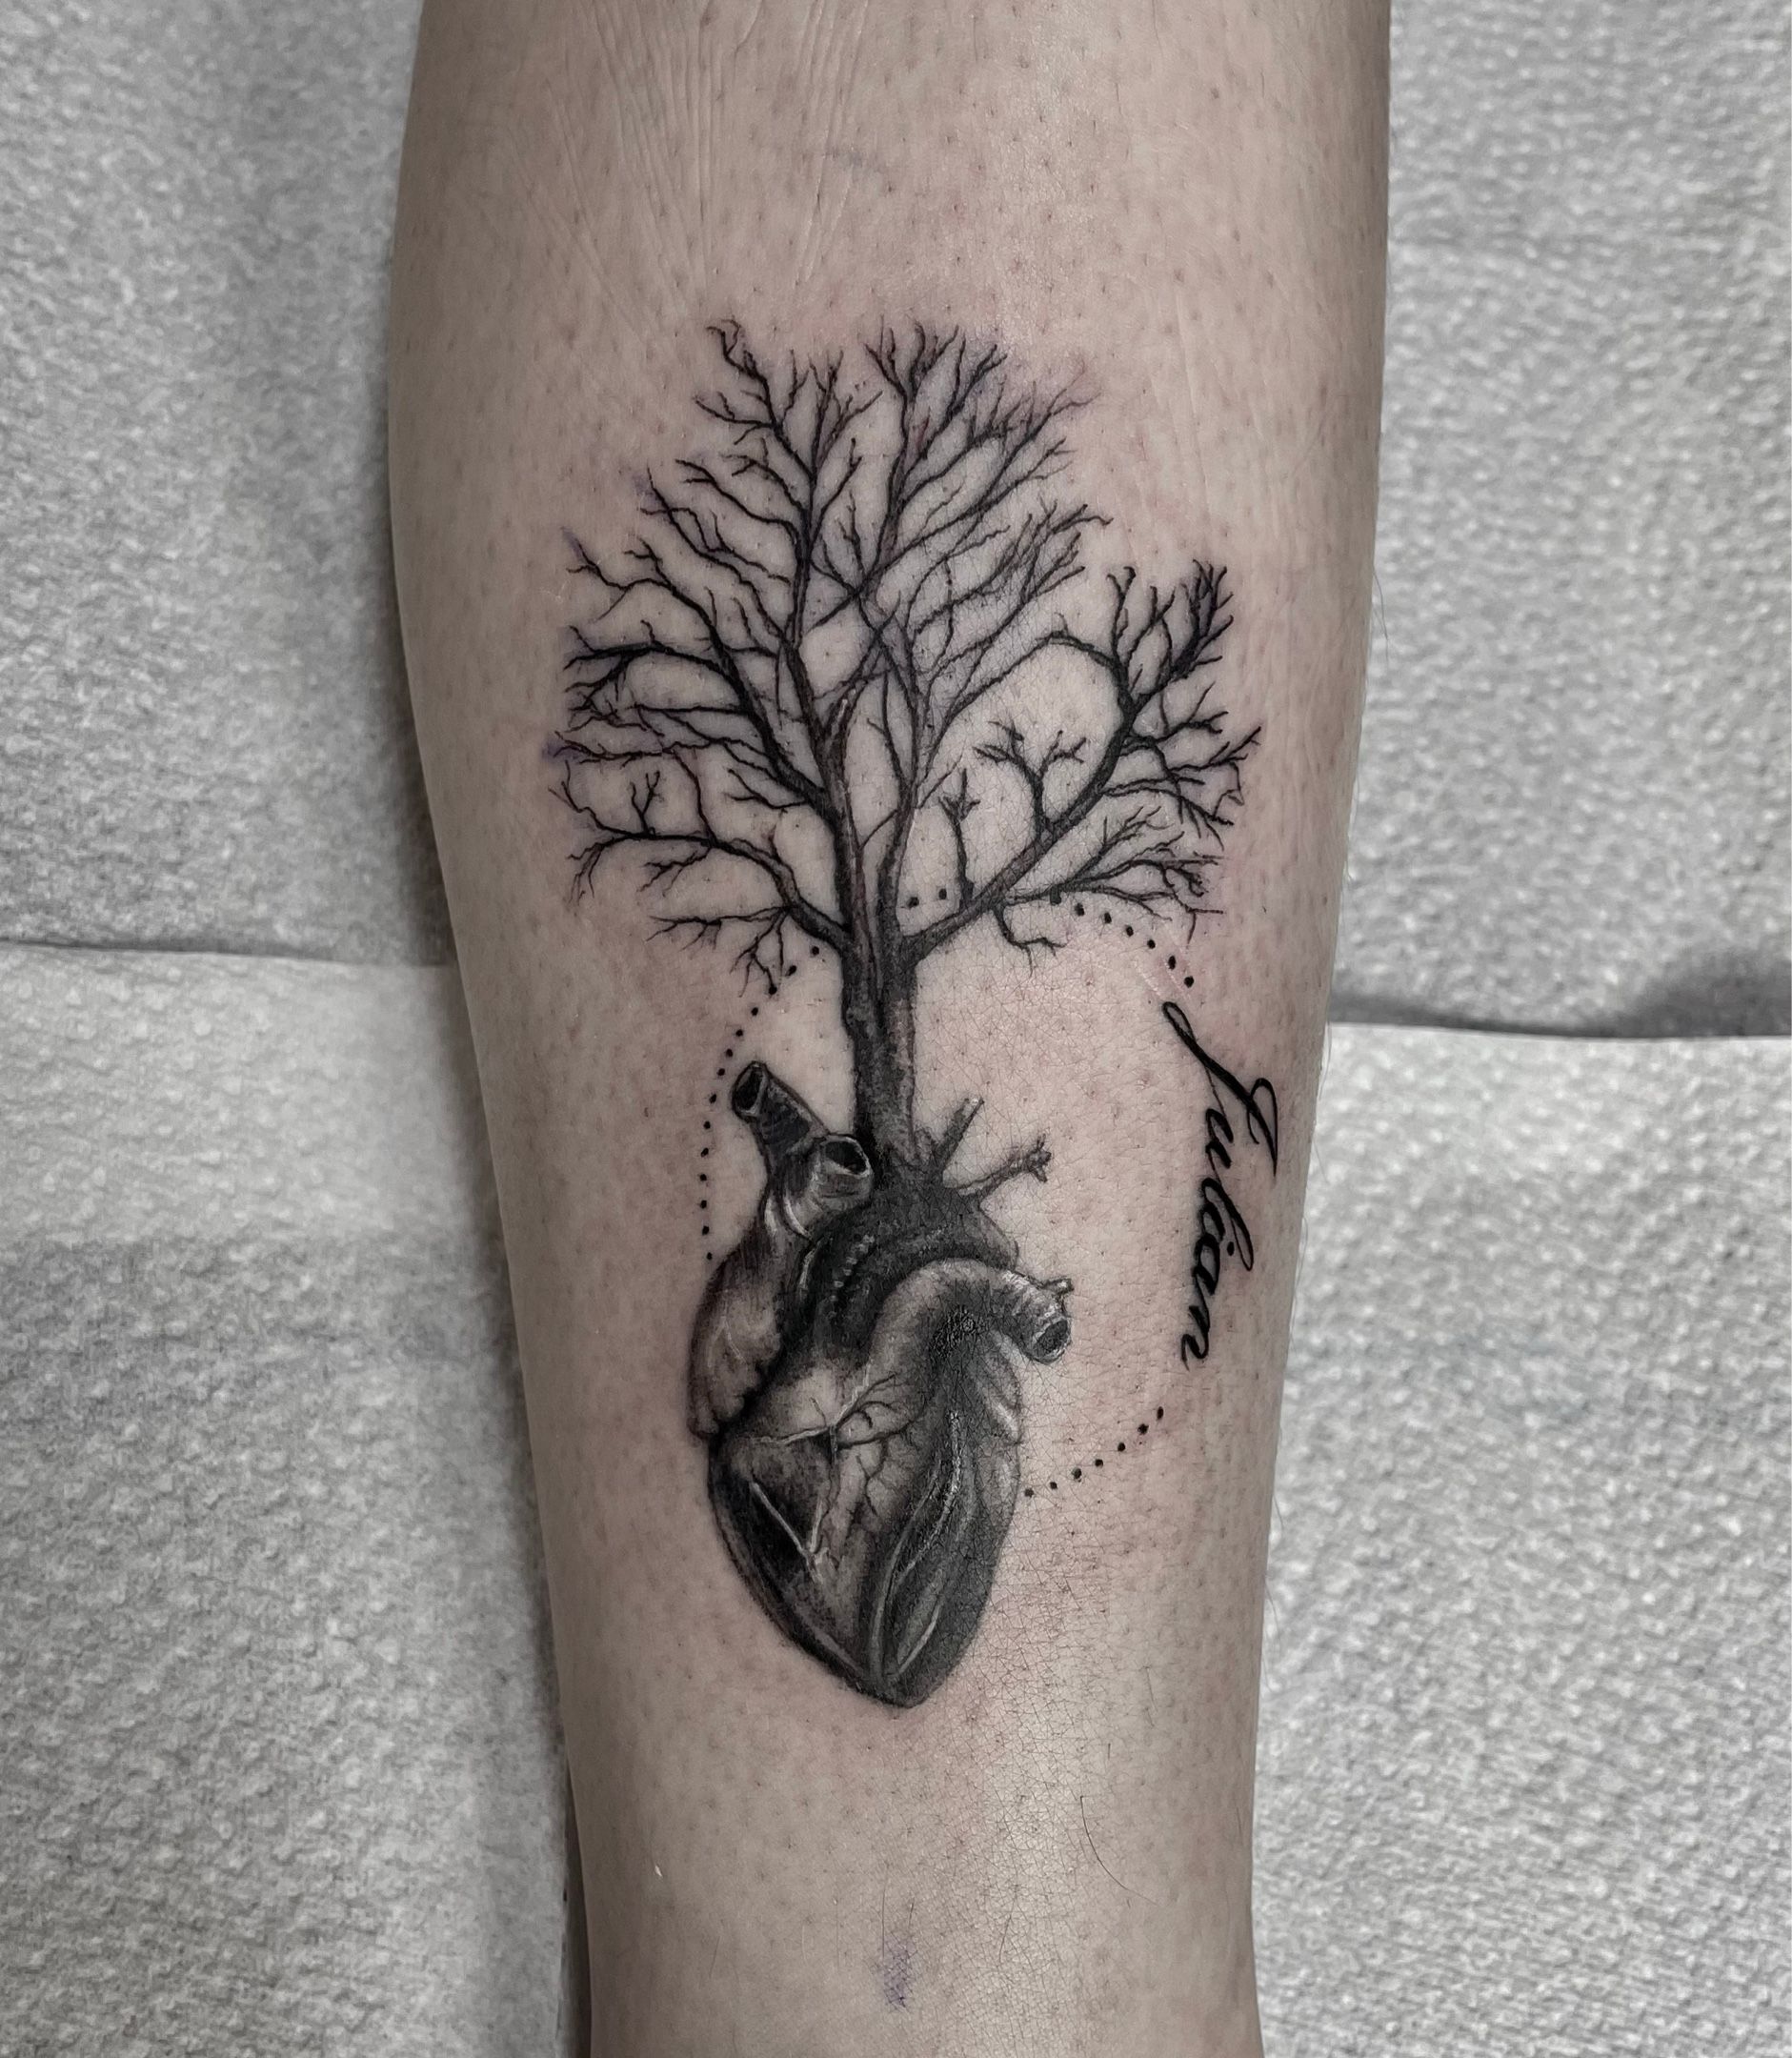 Anatomical heart with tree by Martin Hatton at Asylum Tattoo in Latonia KY   rtattoos